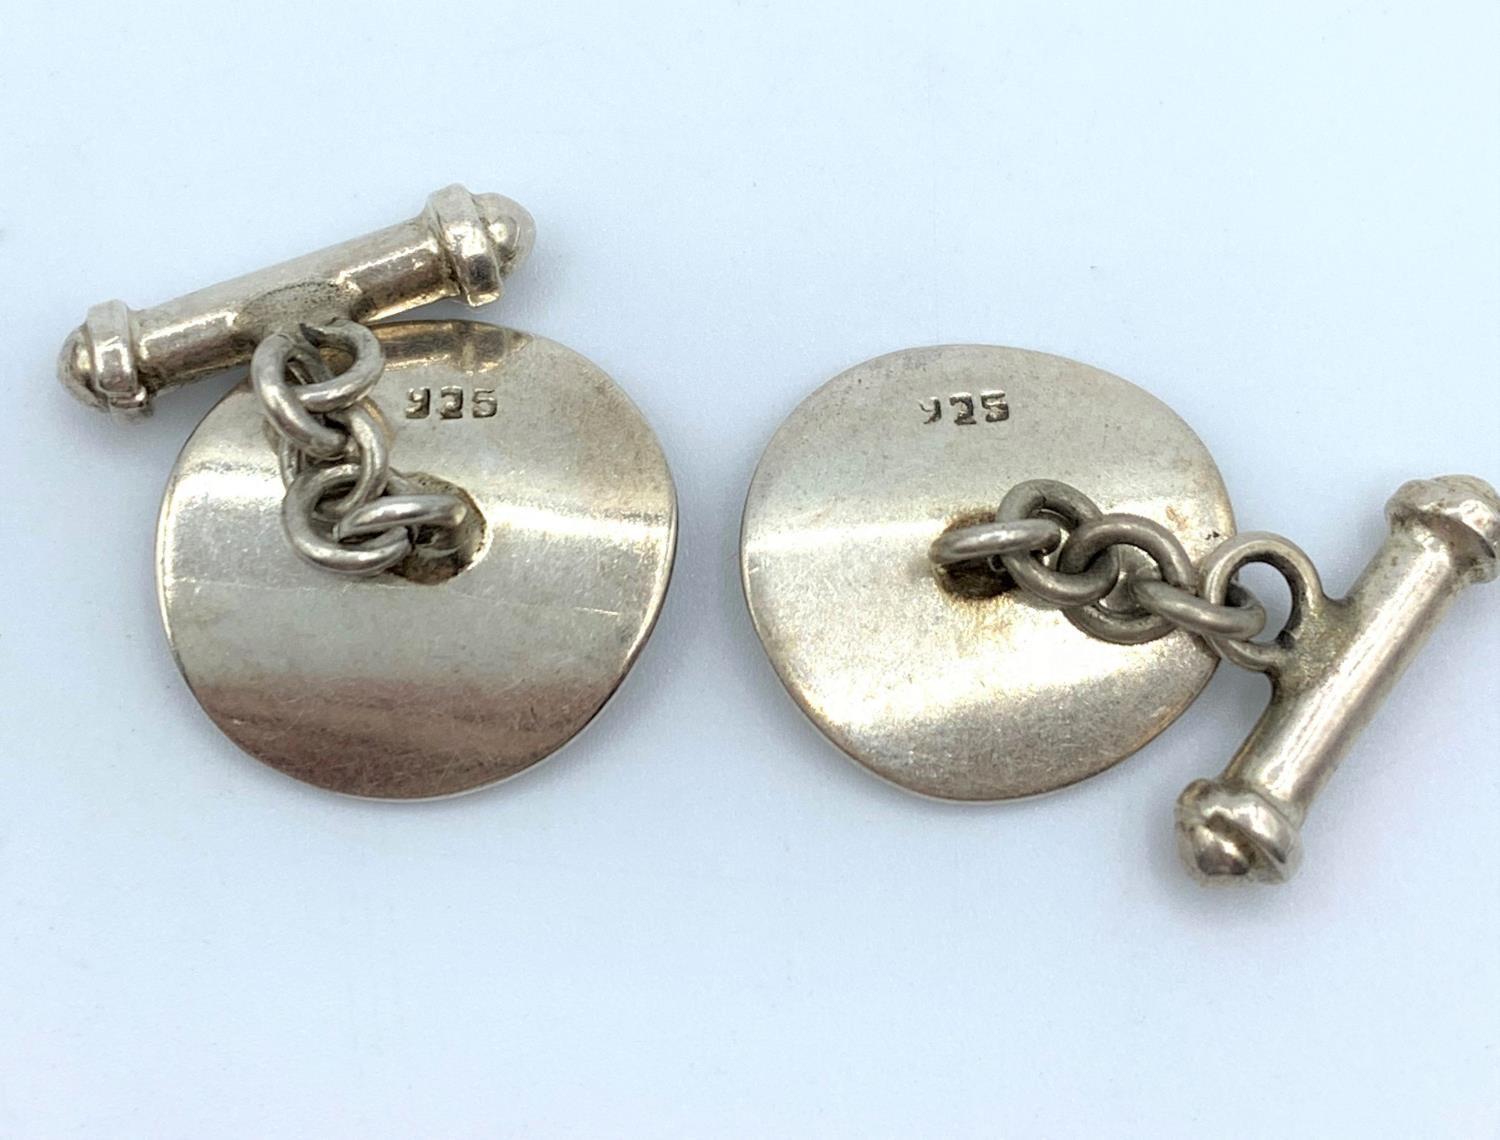 Pair of Vintage Silver Cufflinks, weight 9g - Image 4 of 4